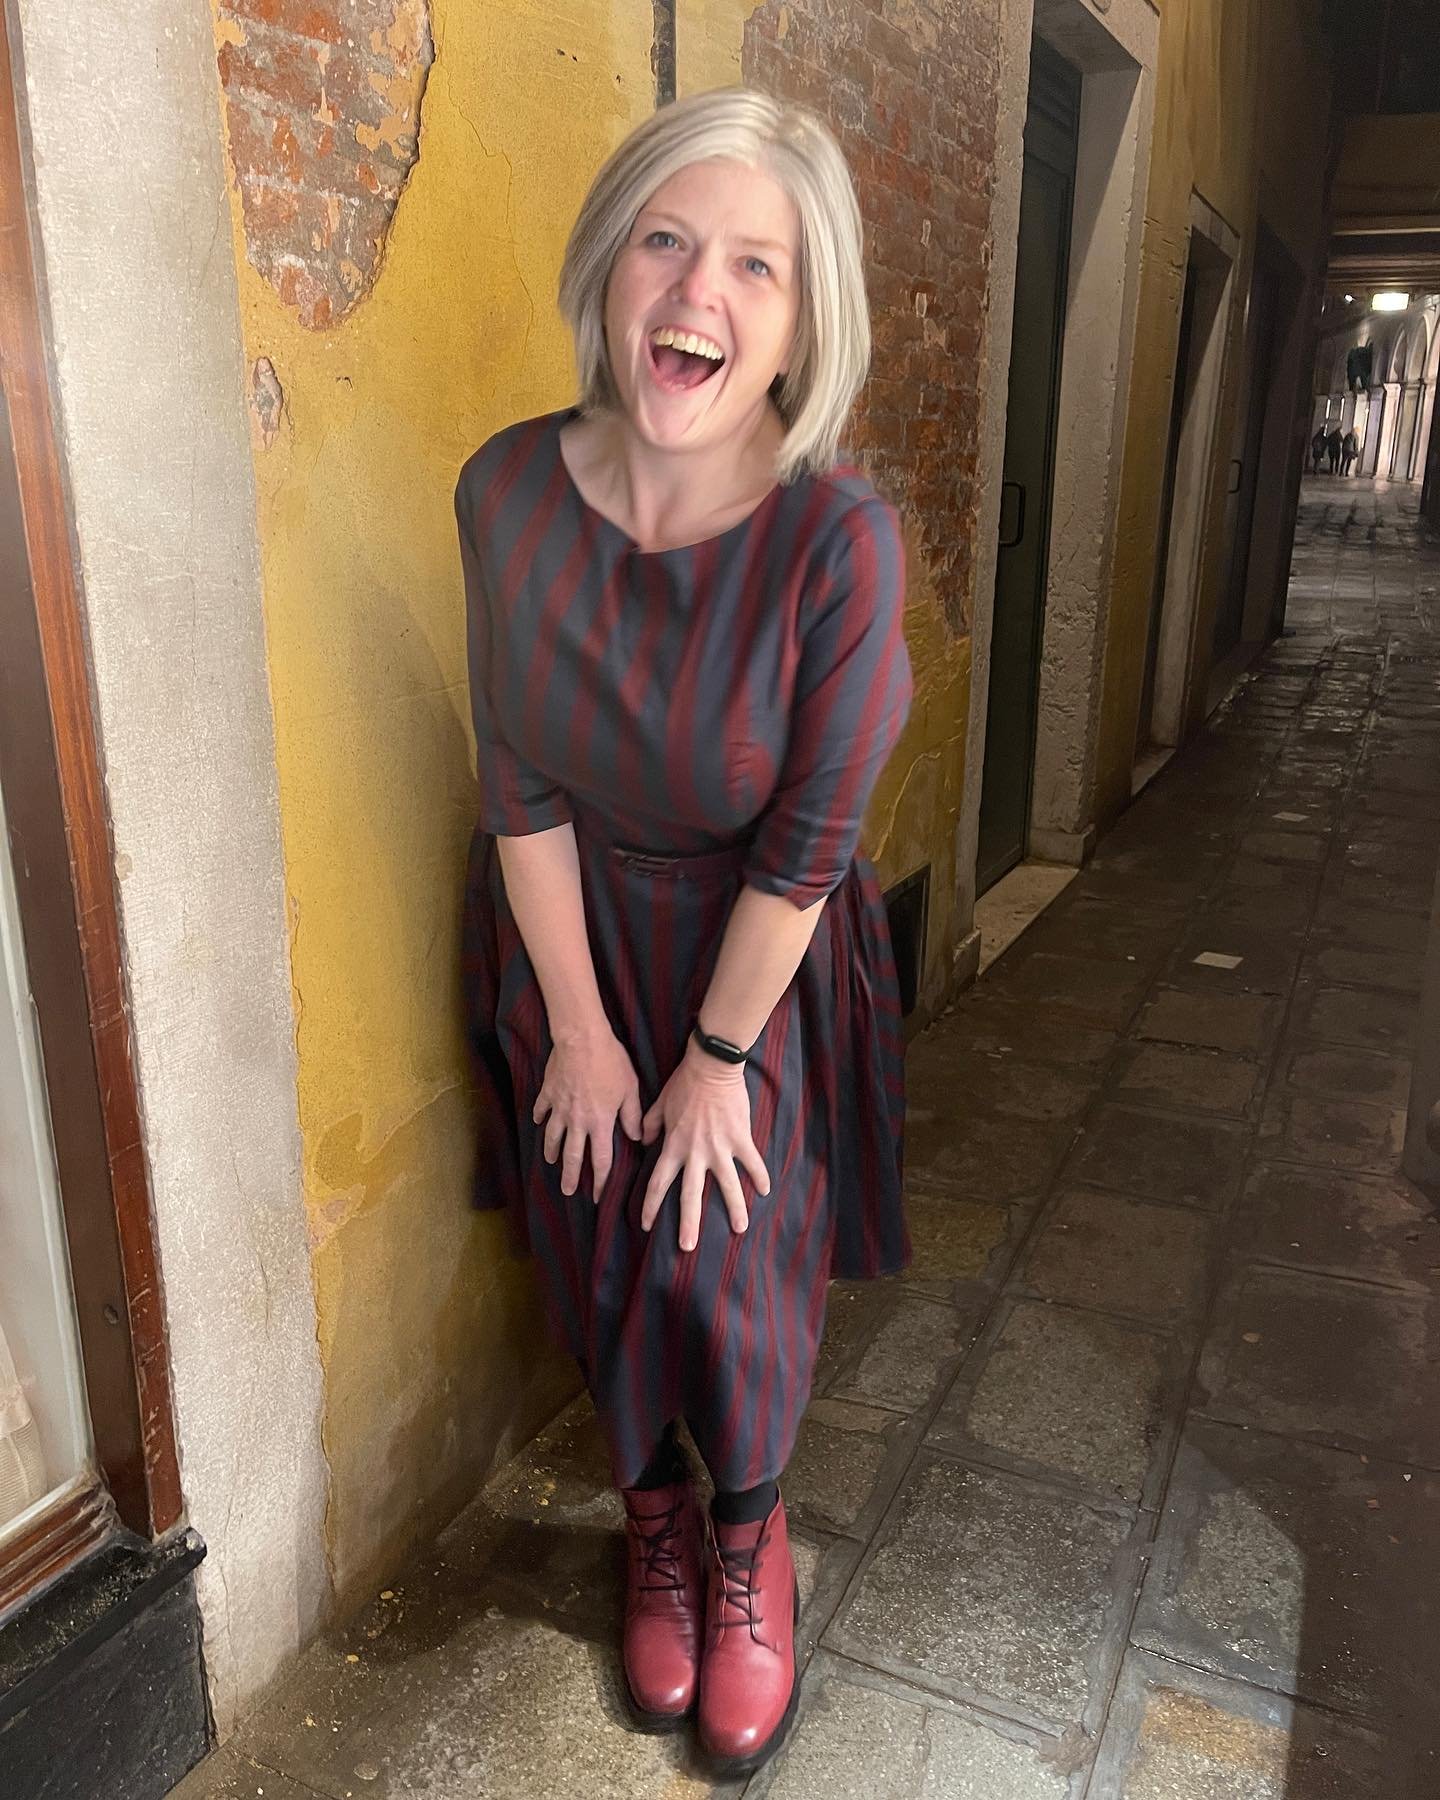 Goofy poses in an alley in Venice&hellip; on the way back from seeing Vivaldi&rsquo;s 4 Seasons played by some extraordinary musicians in his old church. Core memories up in here.